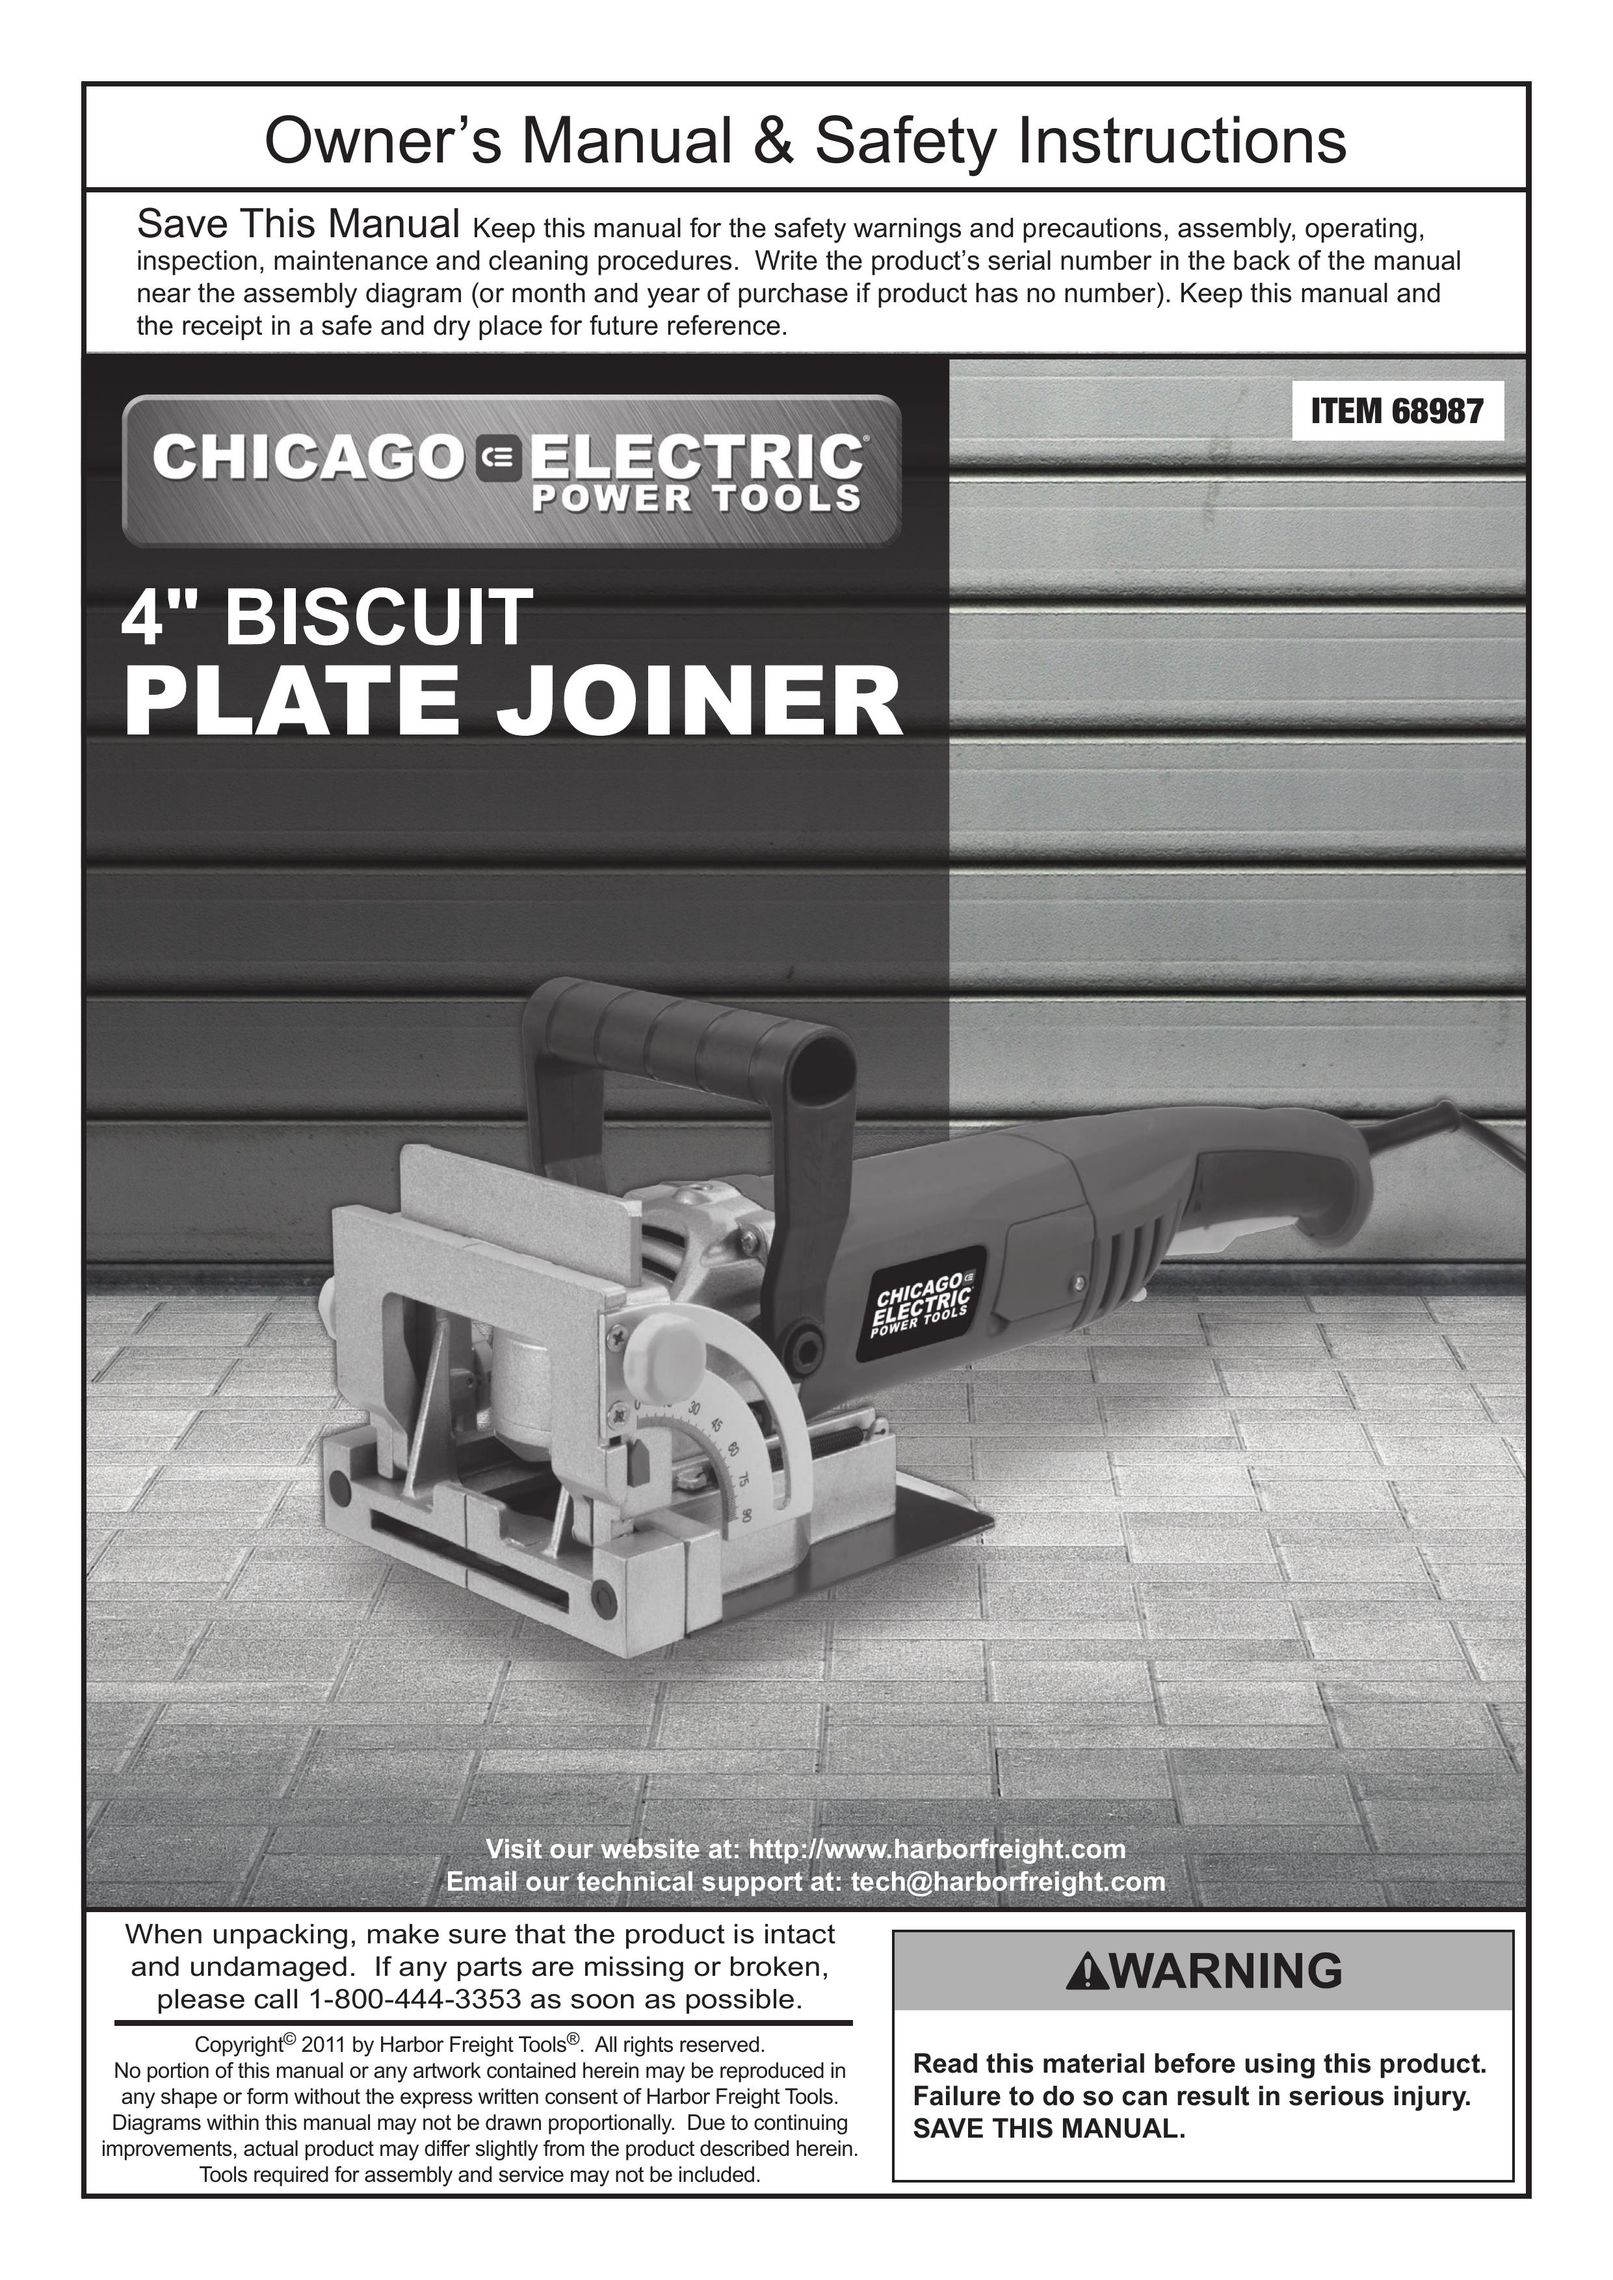 Chicago Electric 68987 Biscuit Joiner User Manual (Page 1)